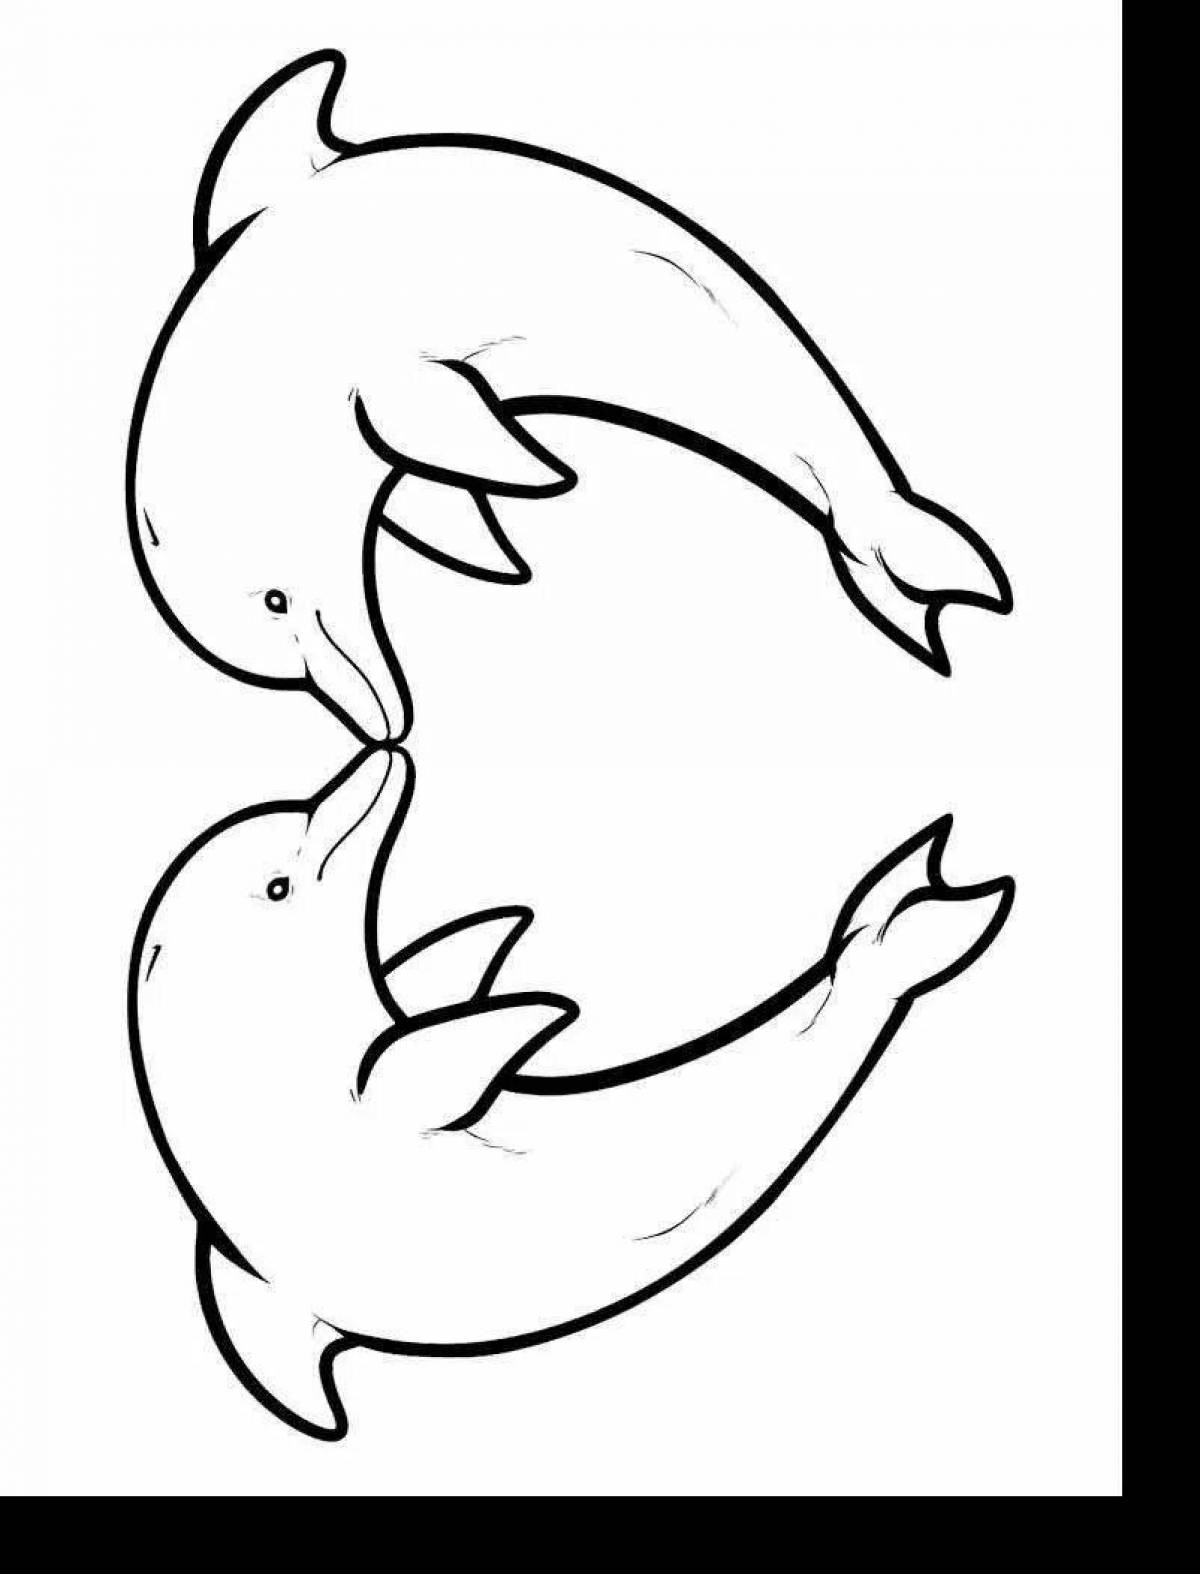 Charming white dolphin coloring book